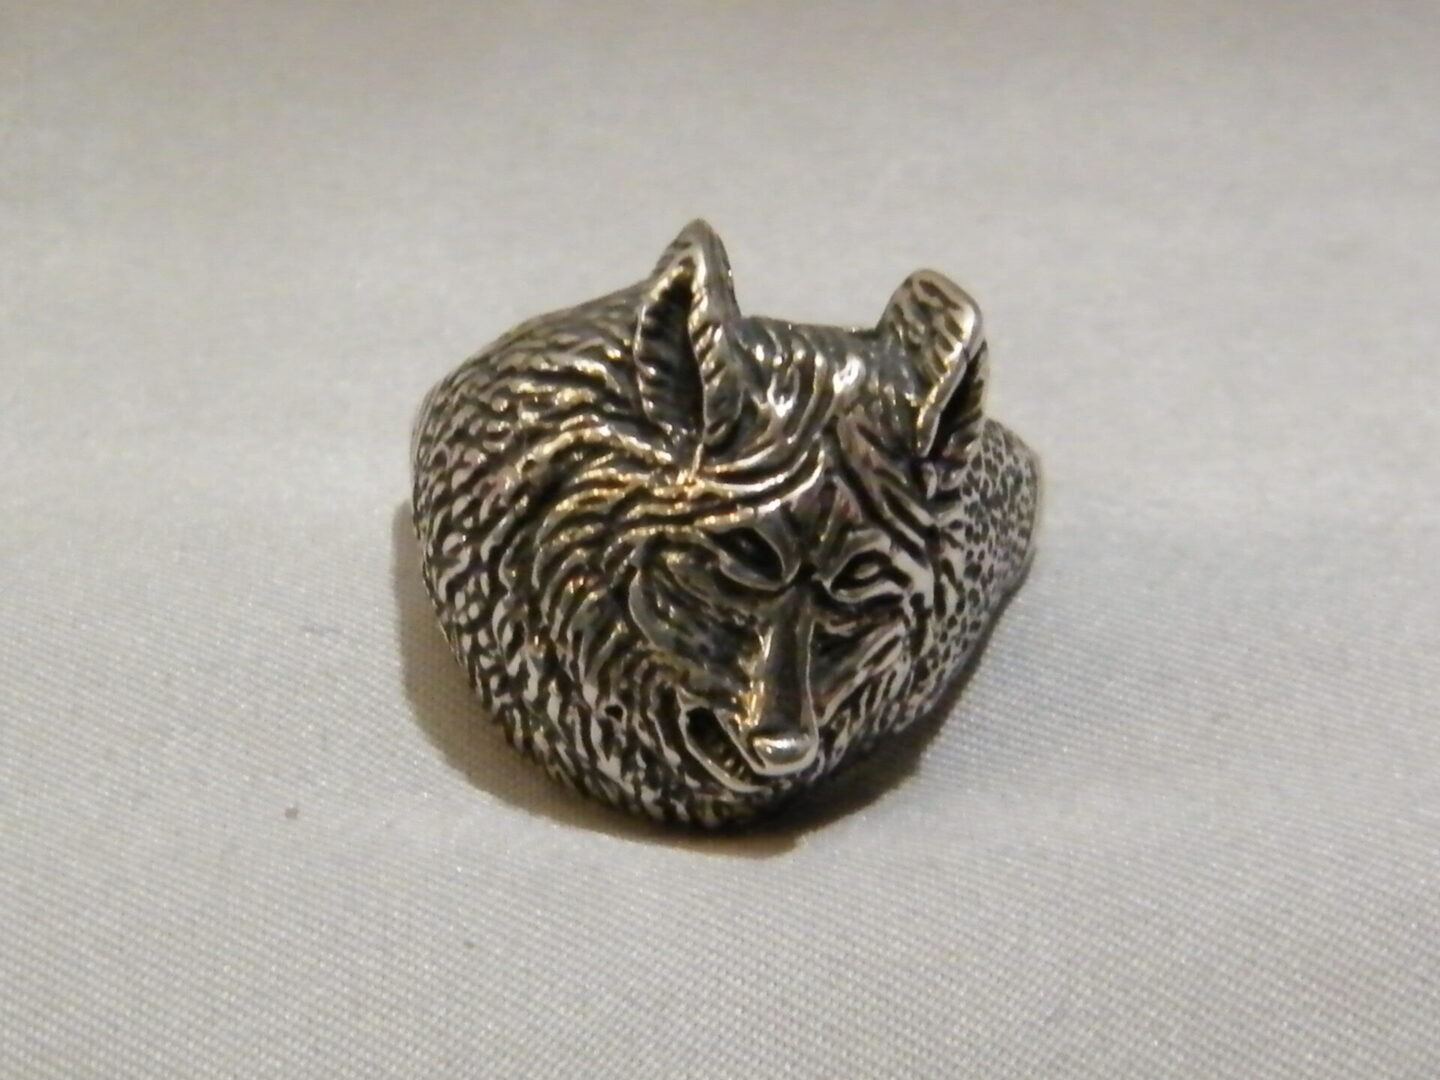 A Fox Figure Shaped Sterling Silver Ring